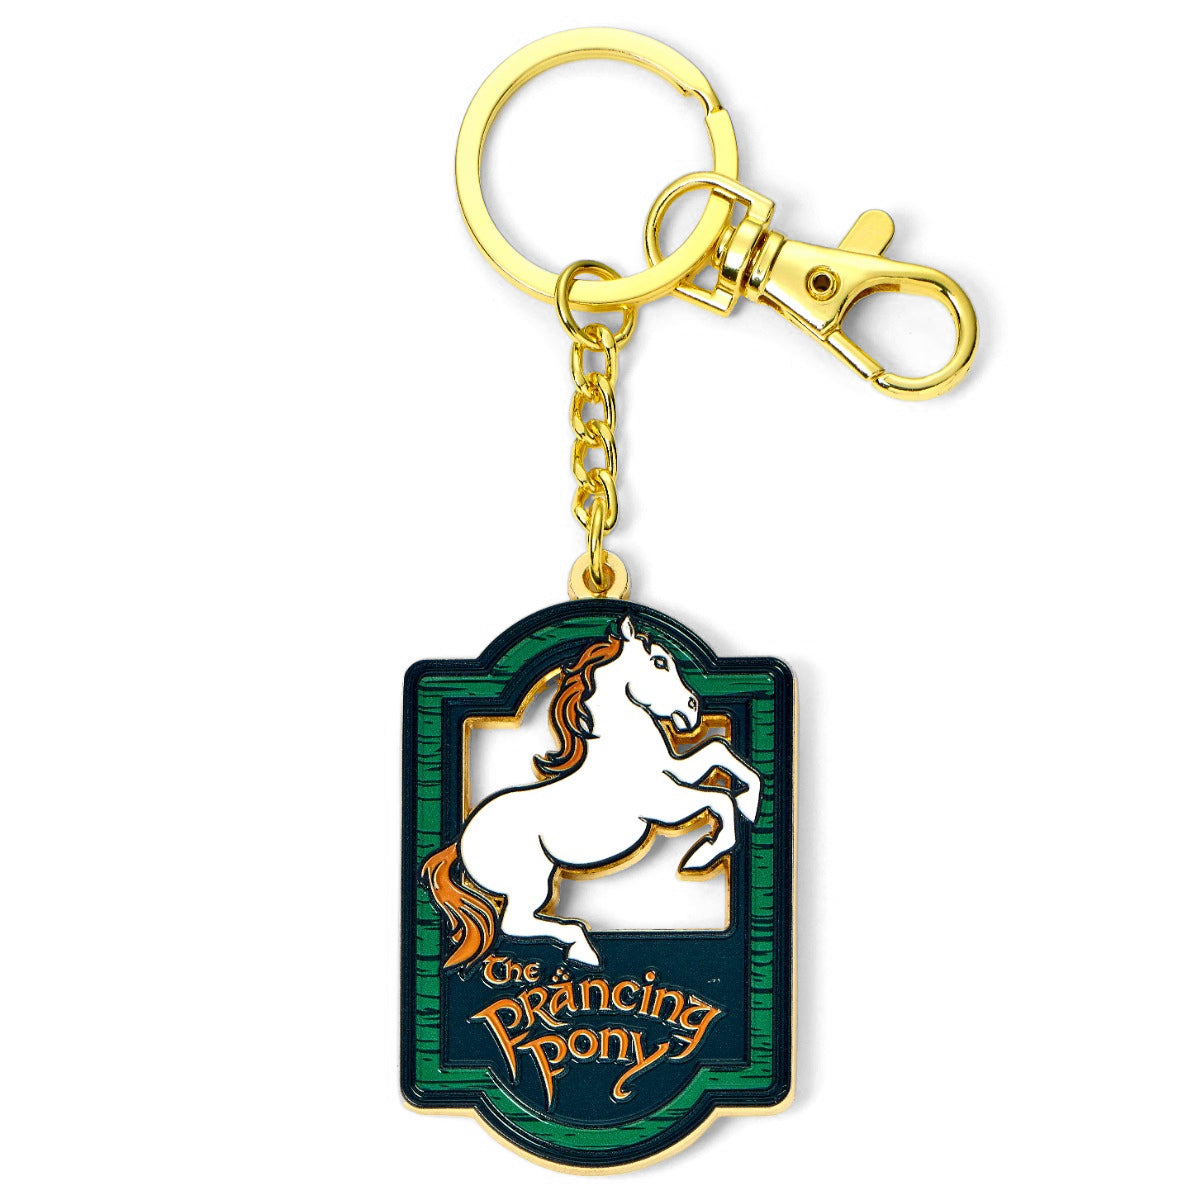 The Lord Of The Rings Prancing Pony Pub Sign Key Ring